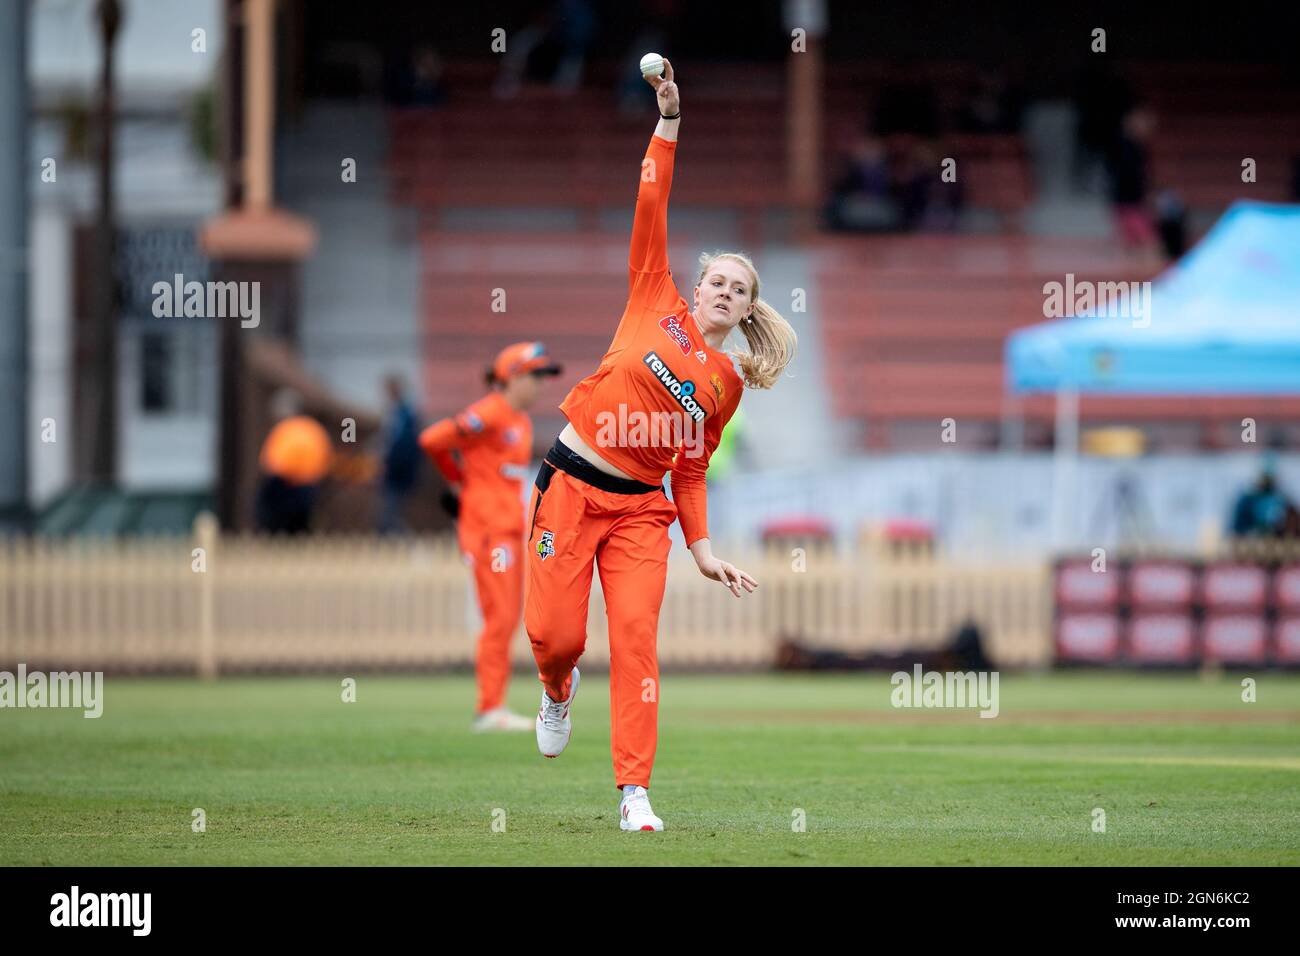 Sarah Glenn of the Perth Scorchers warms up to bowl during the week 1 Womens Big Bash League cricket match between Perth Scorchers and Brisbane Heat